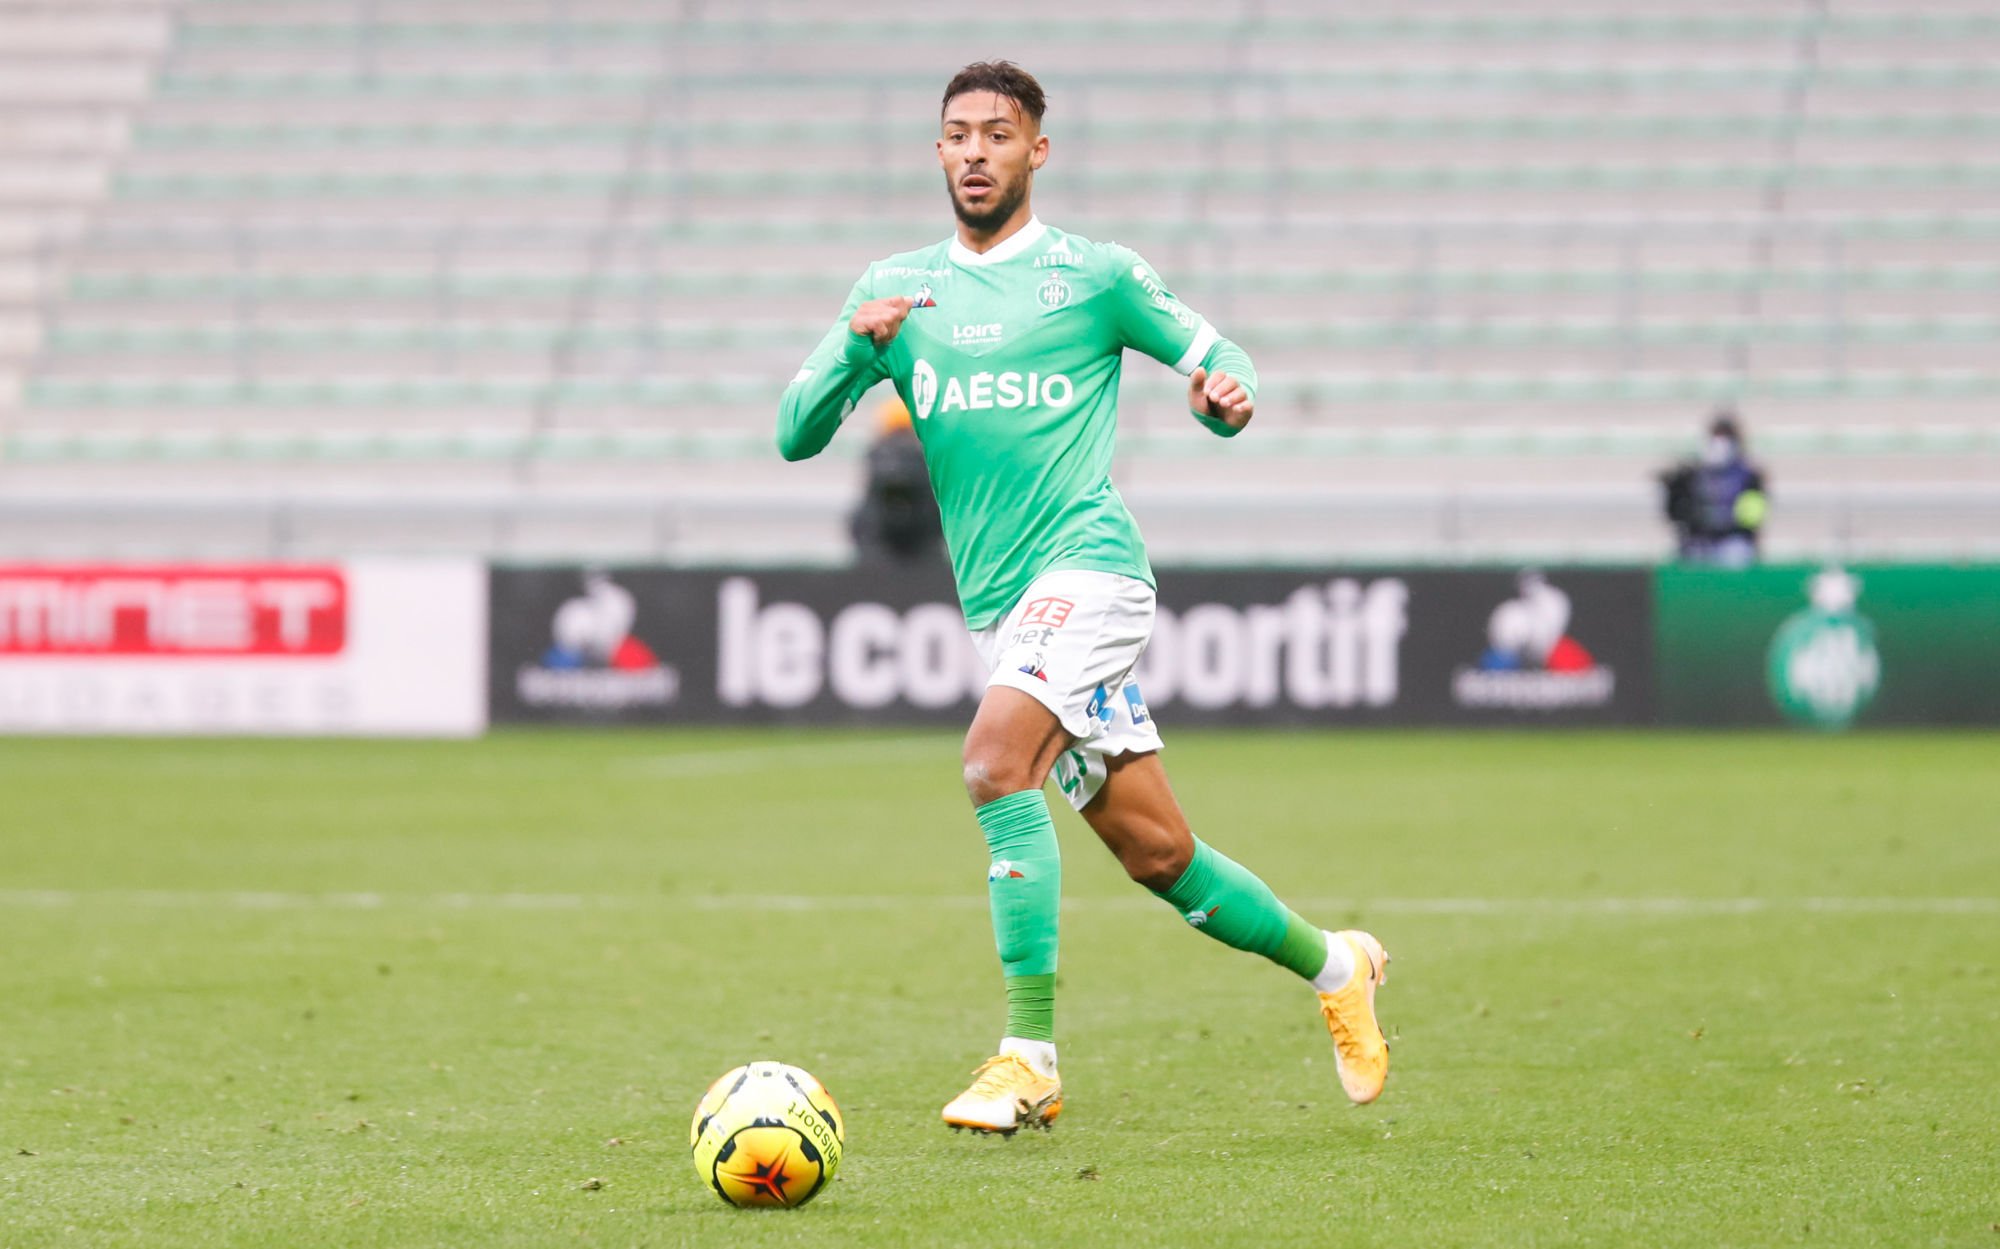 Denis BOUANGA of Saint Etienne during the Ligue 1 match between AS Saint-Etienne and Stade Rennes at Stade Geoffroy-Guichard on September 26, 2020 in Saint-Etienne, France. (Photo by Romain Biard/Icon Sport) - Stade Geoffroy-Guichard - Saint Etienne (France)